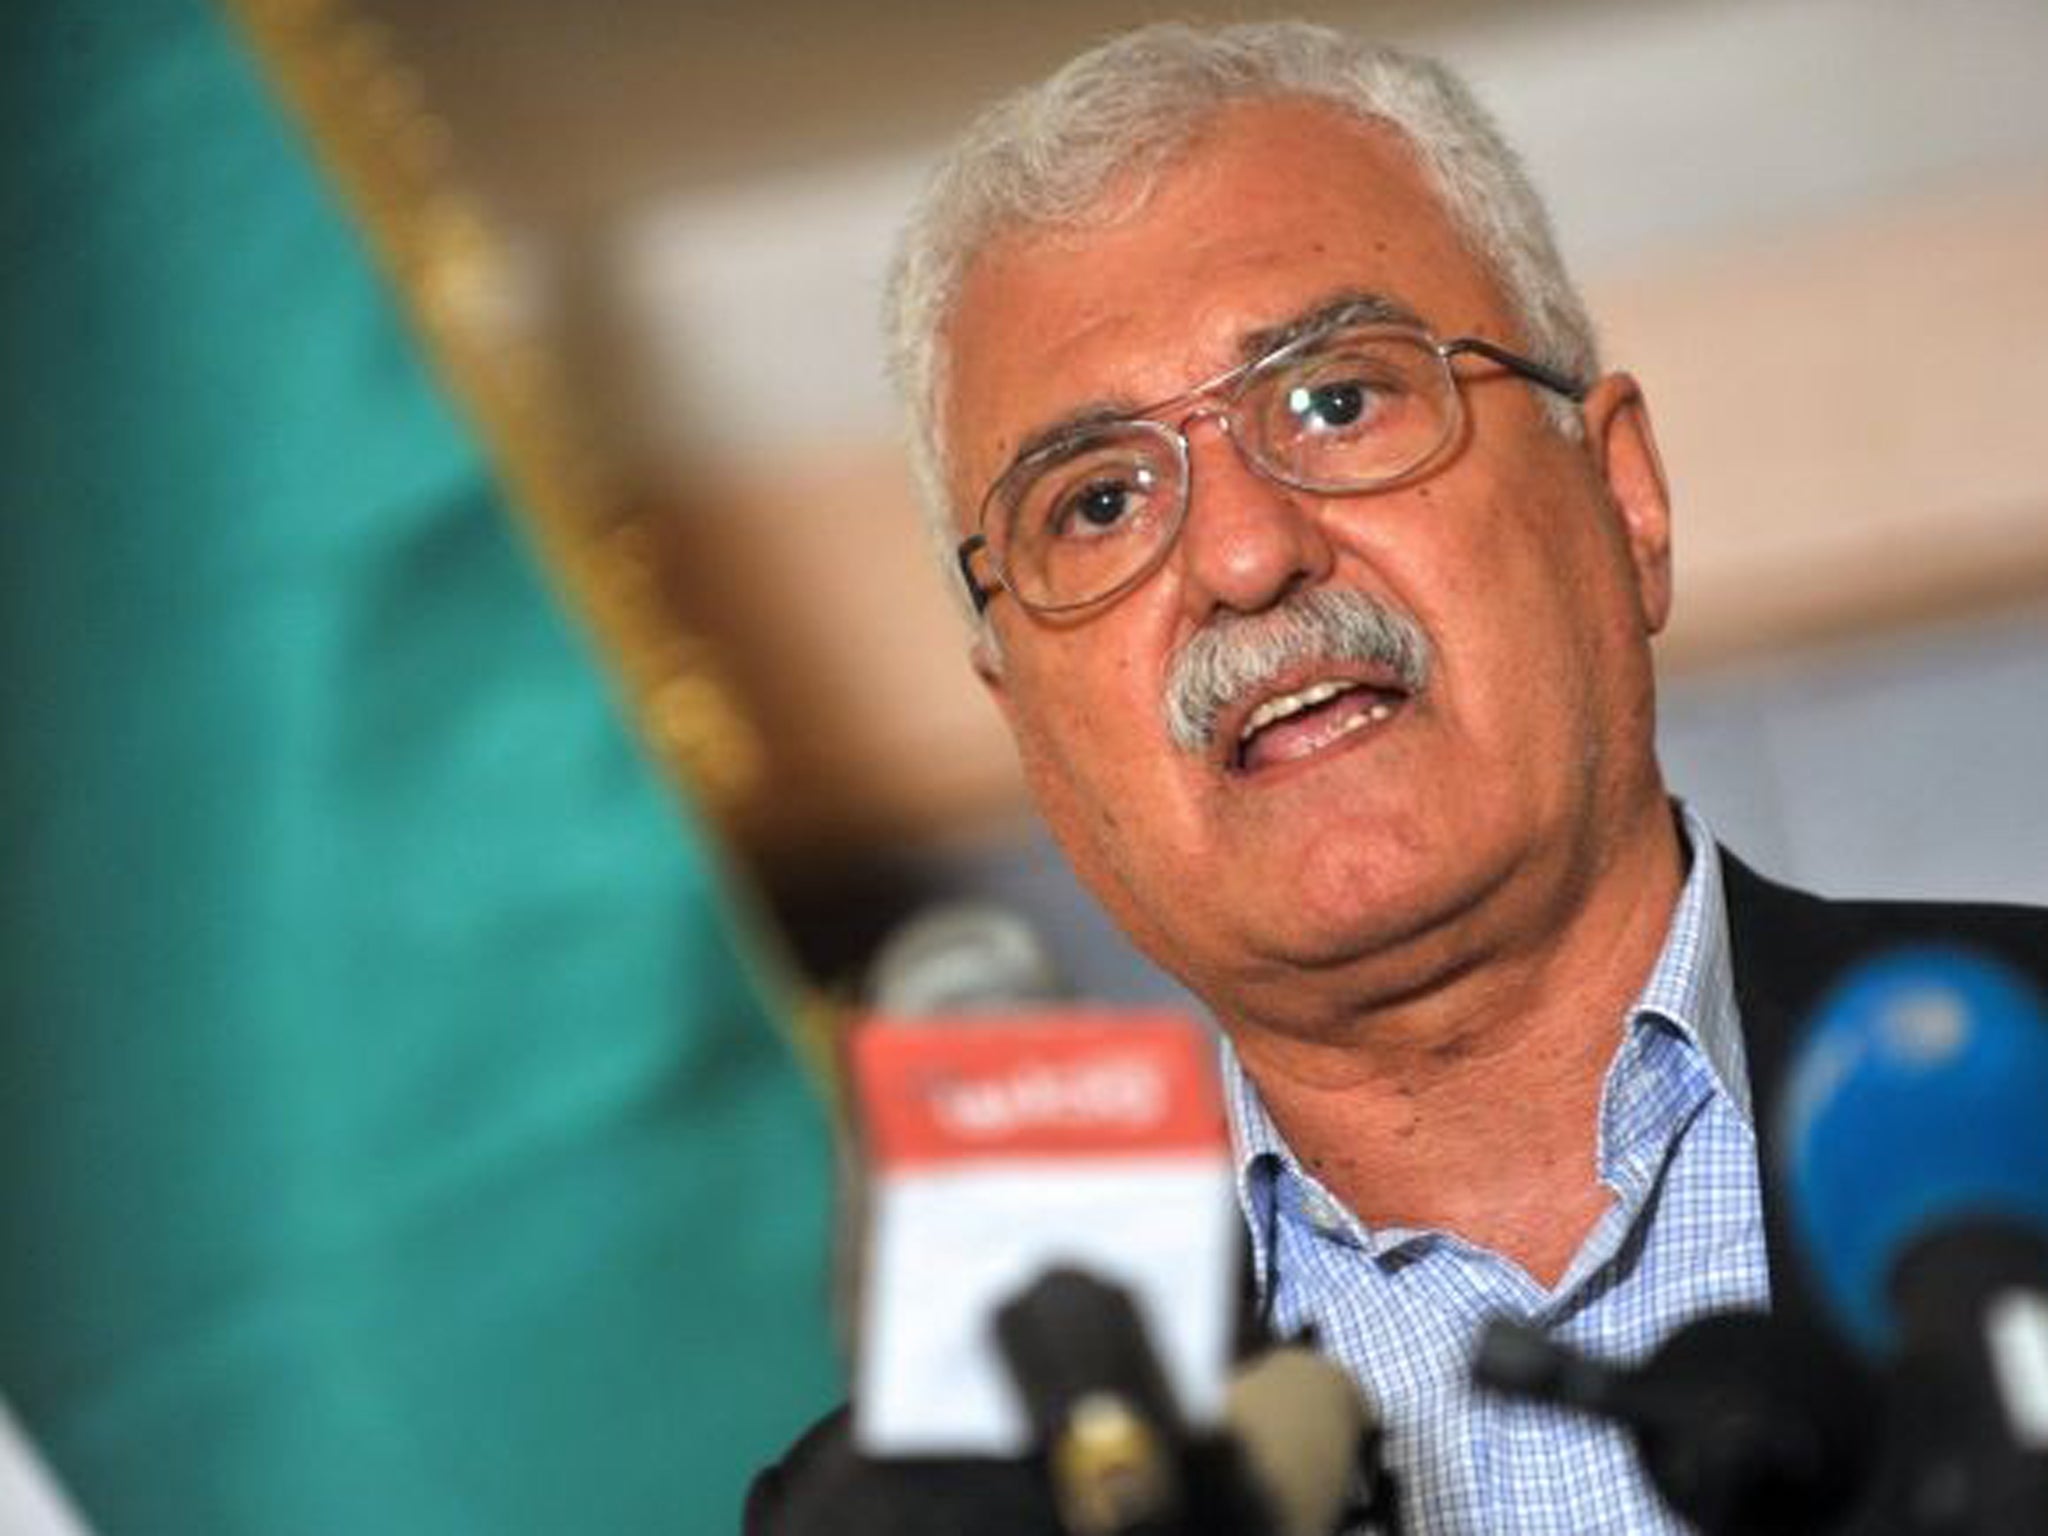 George Sabra, the head of the Syrian National Coalition, told reporters in Istanbul said that Hezbollah's involvement in the bloody civil war made talks impossible